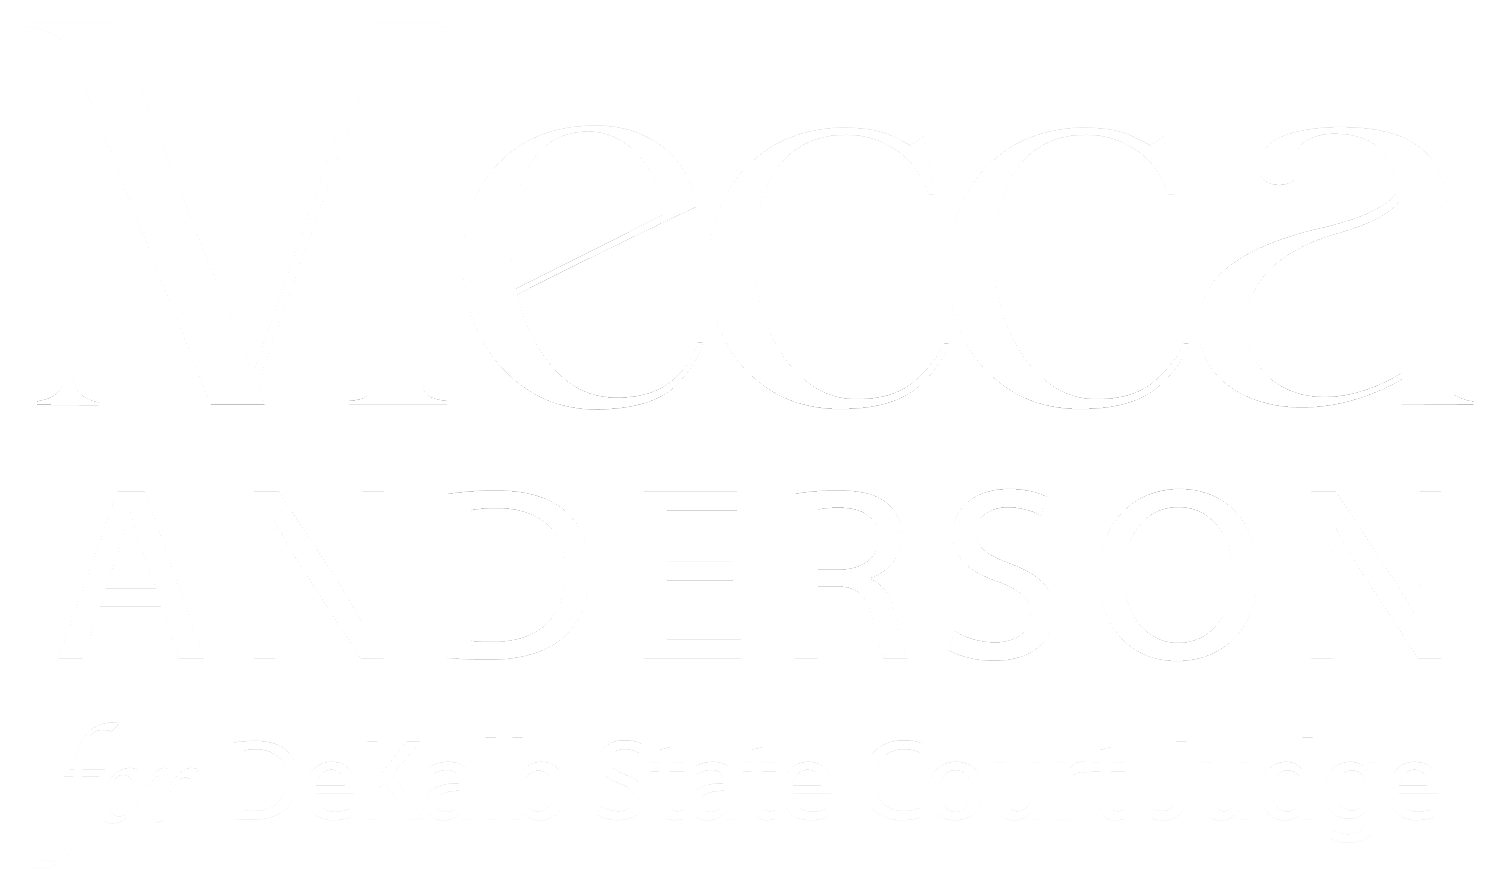 Mecca Anderson for State Court Judge